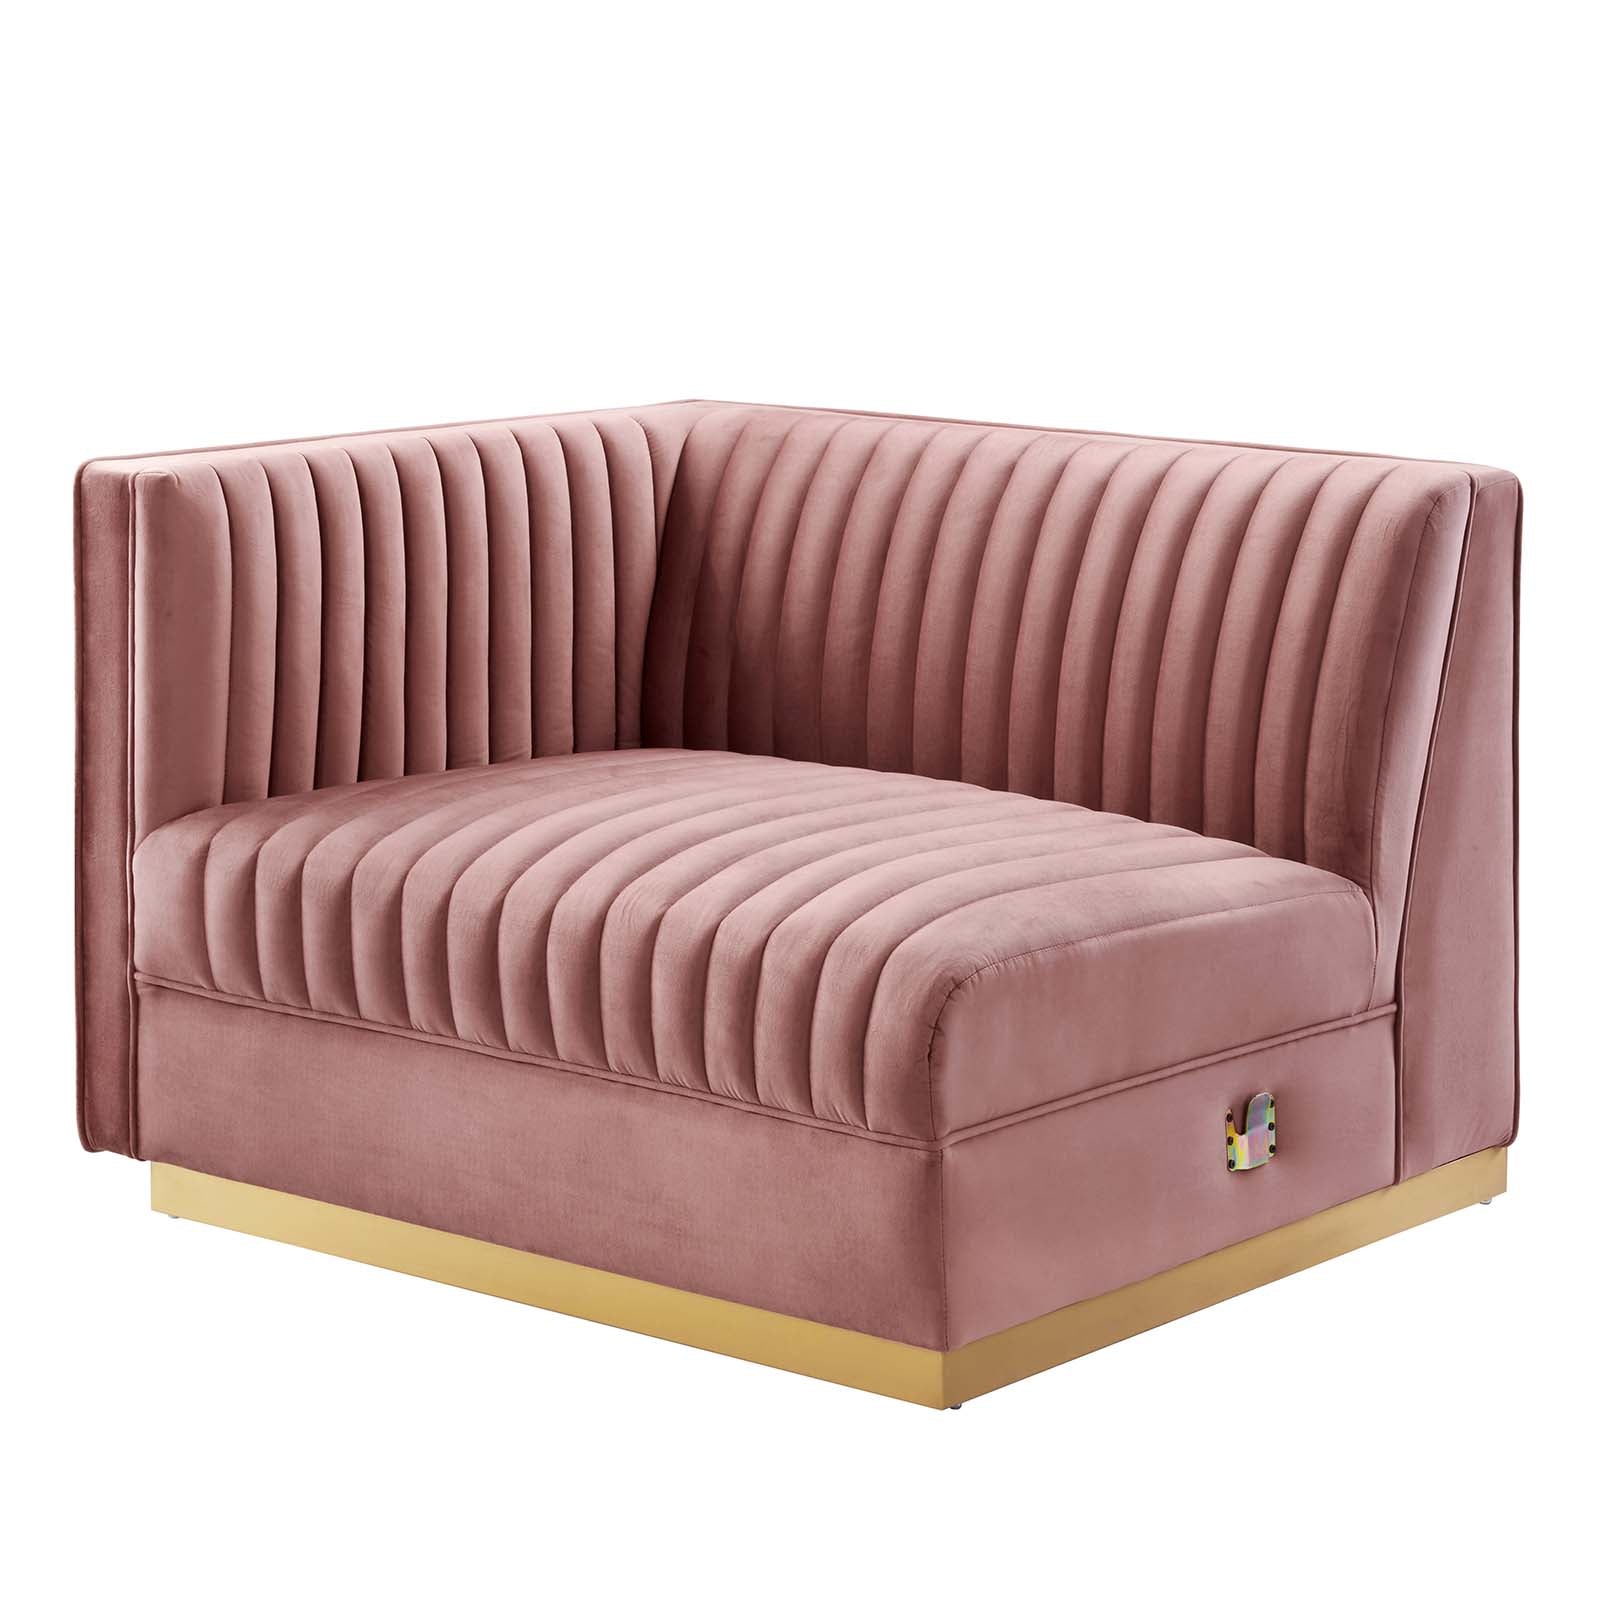 Modway Accent Chairs - Sanguine Channel Tufted Performance Velvet Modular Sectional Sofa Left-Arm Chair Dusty Rose